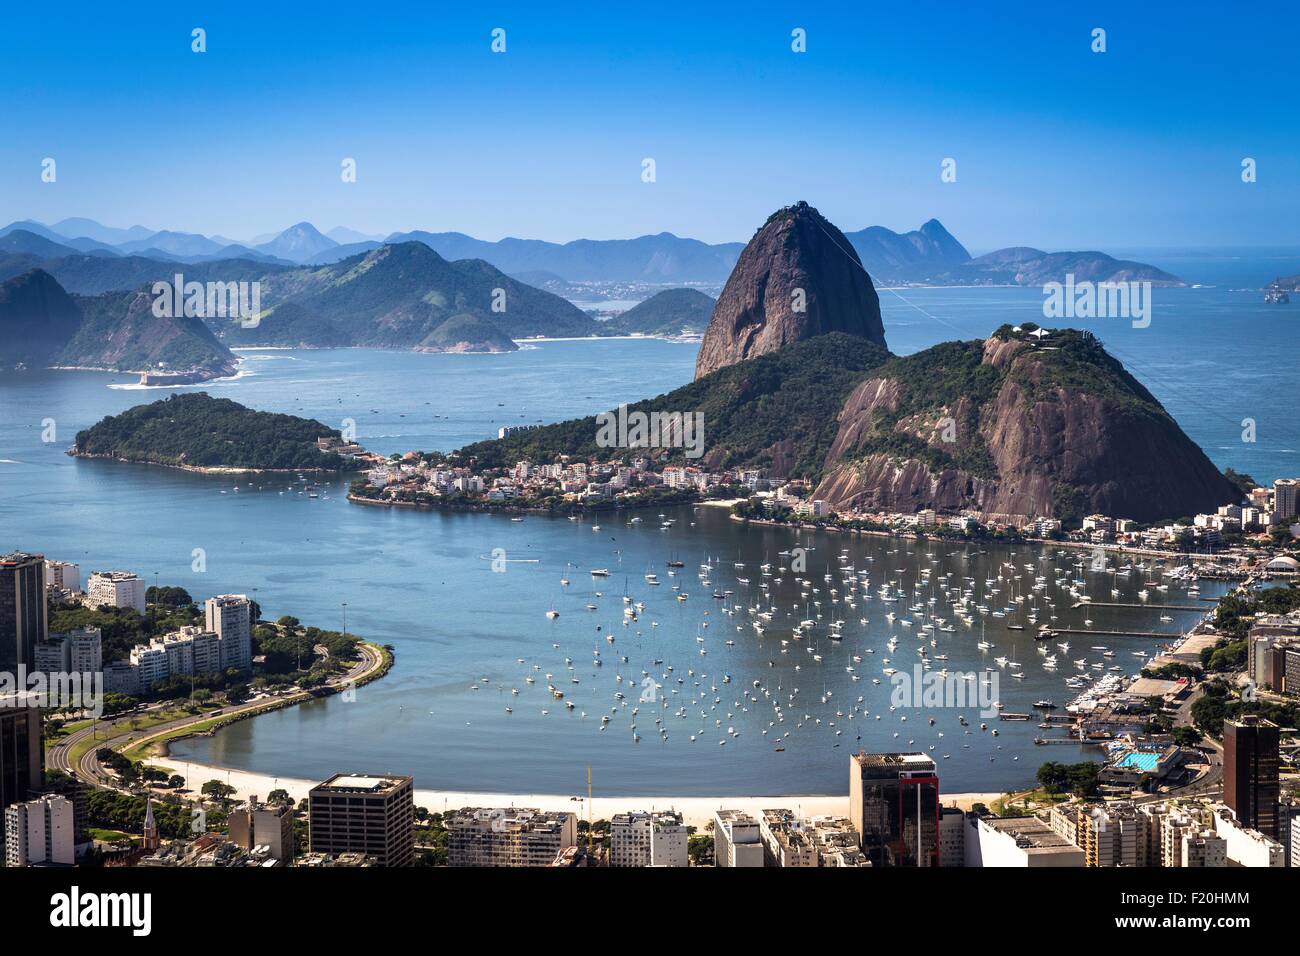 Elevated view of Sugarloaf mountain and Guanabara Bay, Rio de Janeiro, Brazil Stock Photo